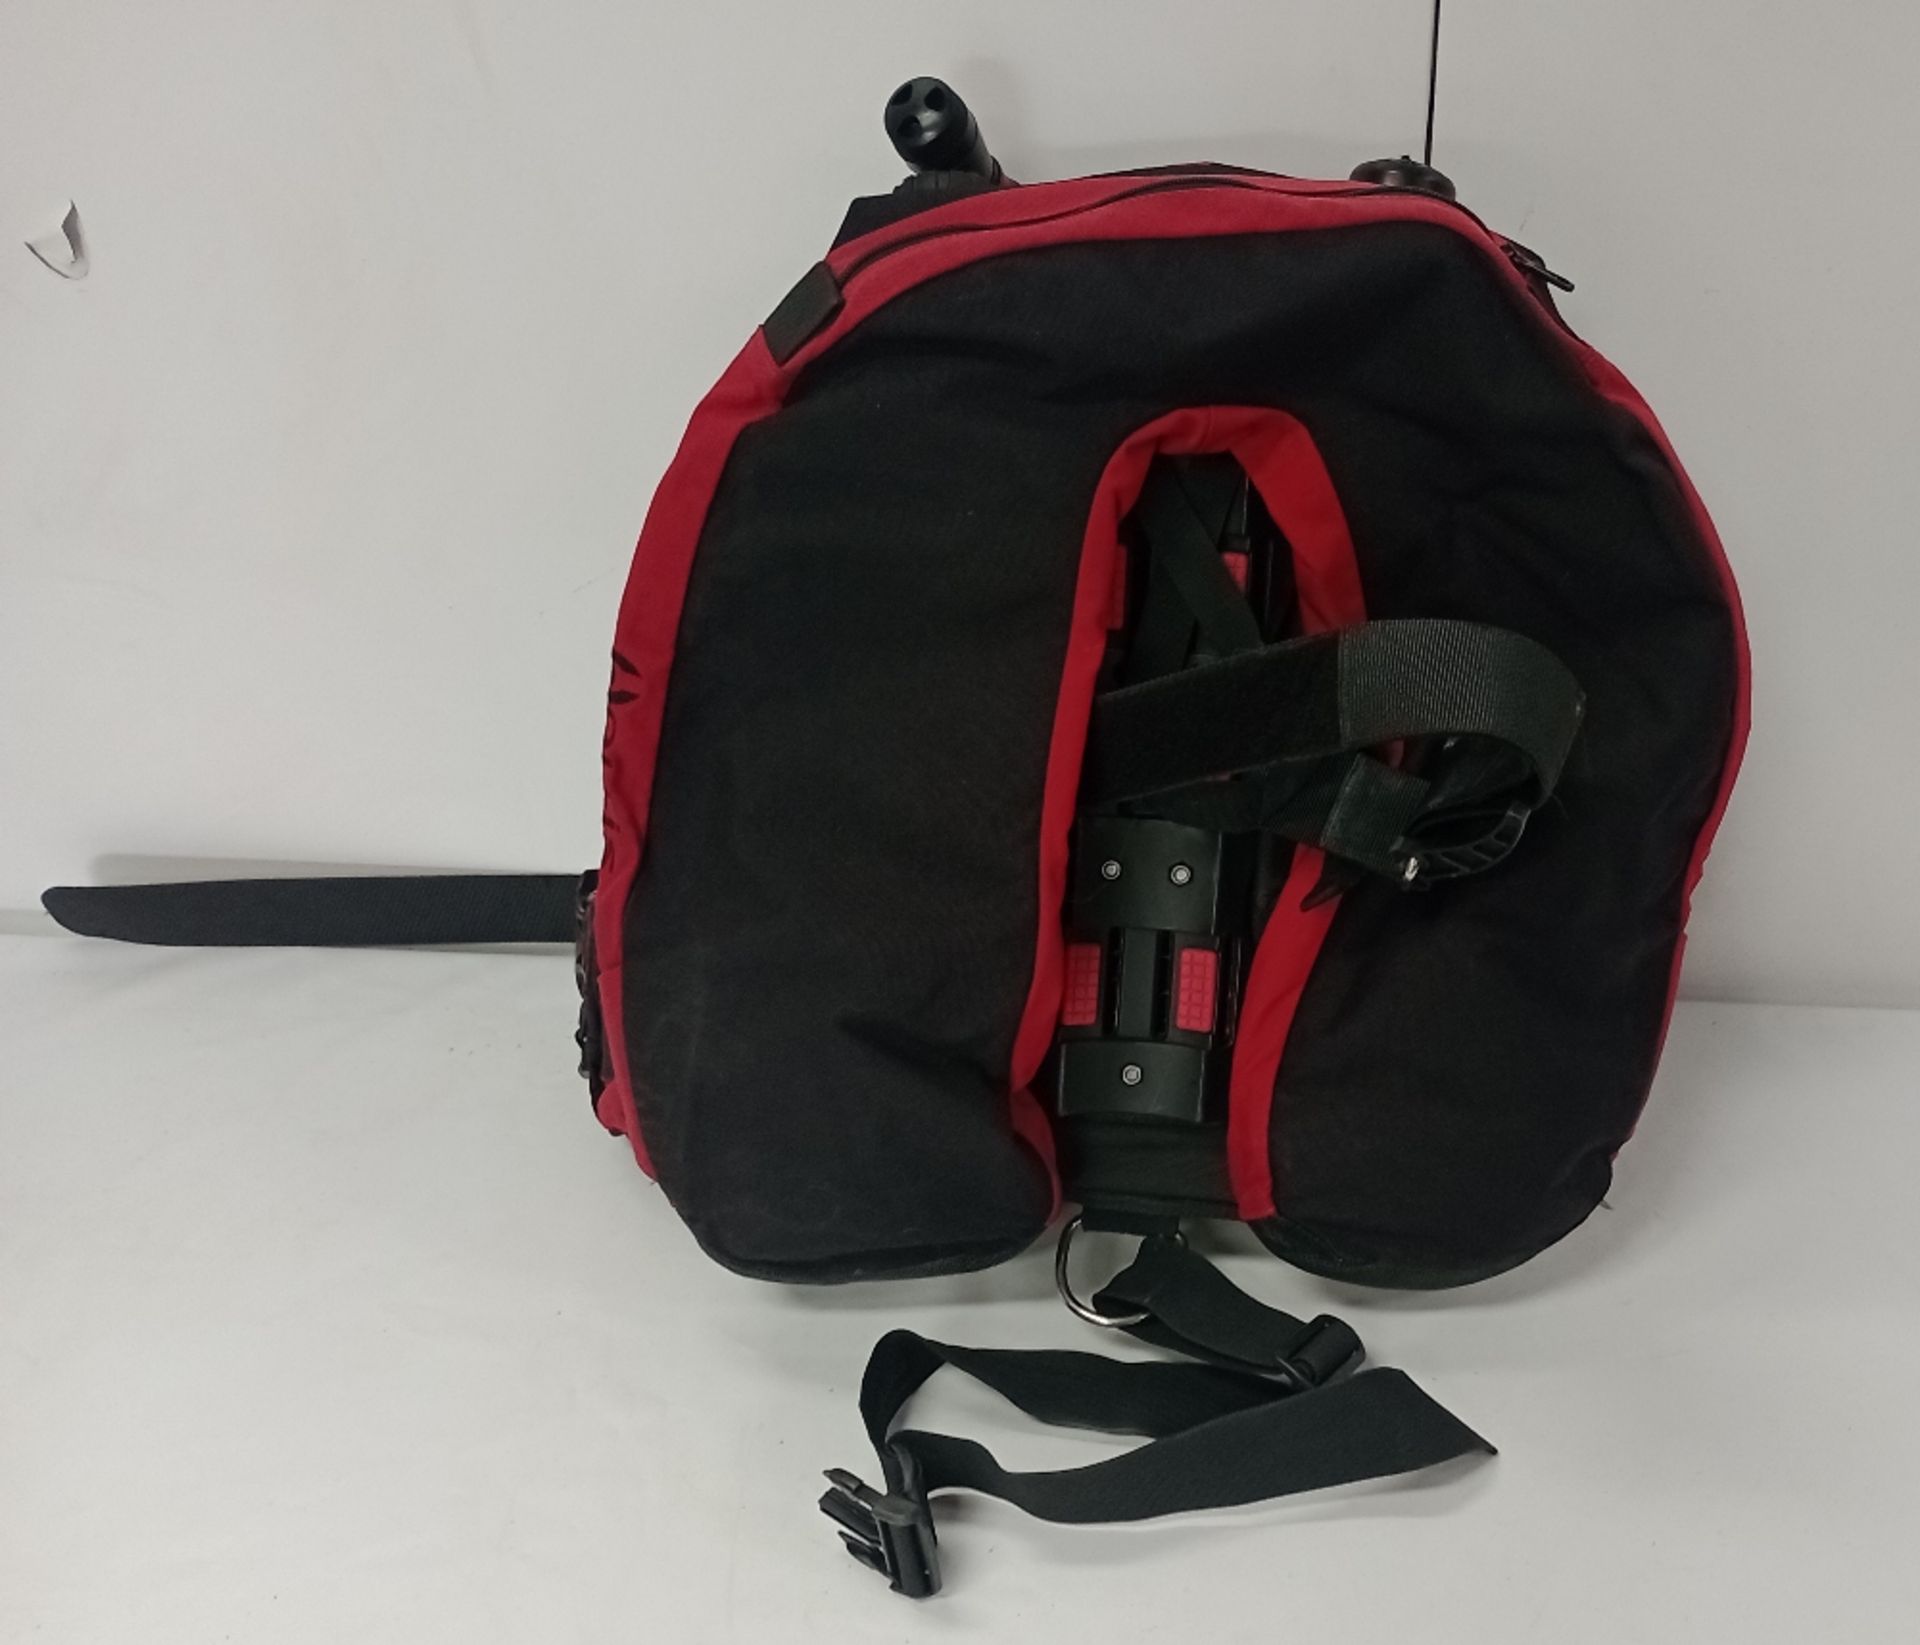 Hollis HD200 Buoyancy Control Device, Size L (Location: Brentwood. Please Refer to General Notes) - Image 2 of 4